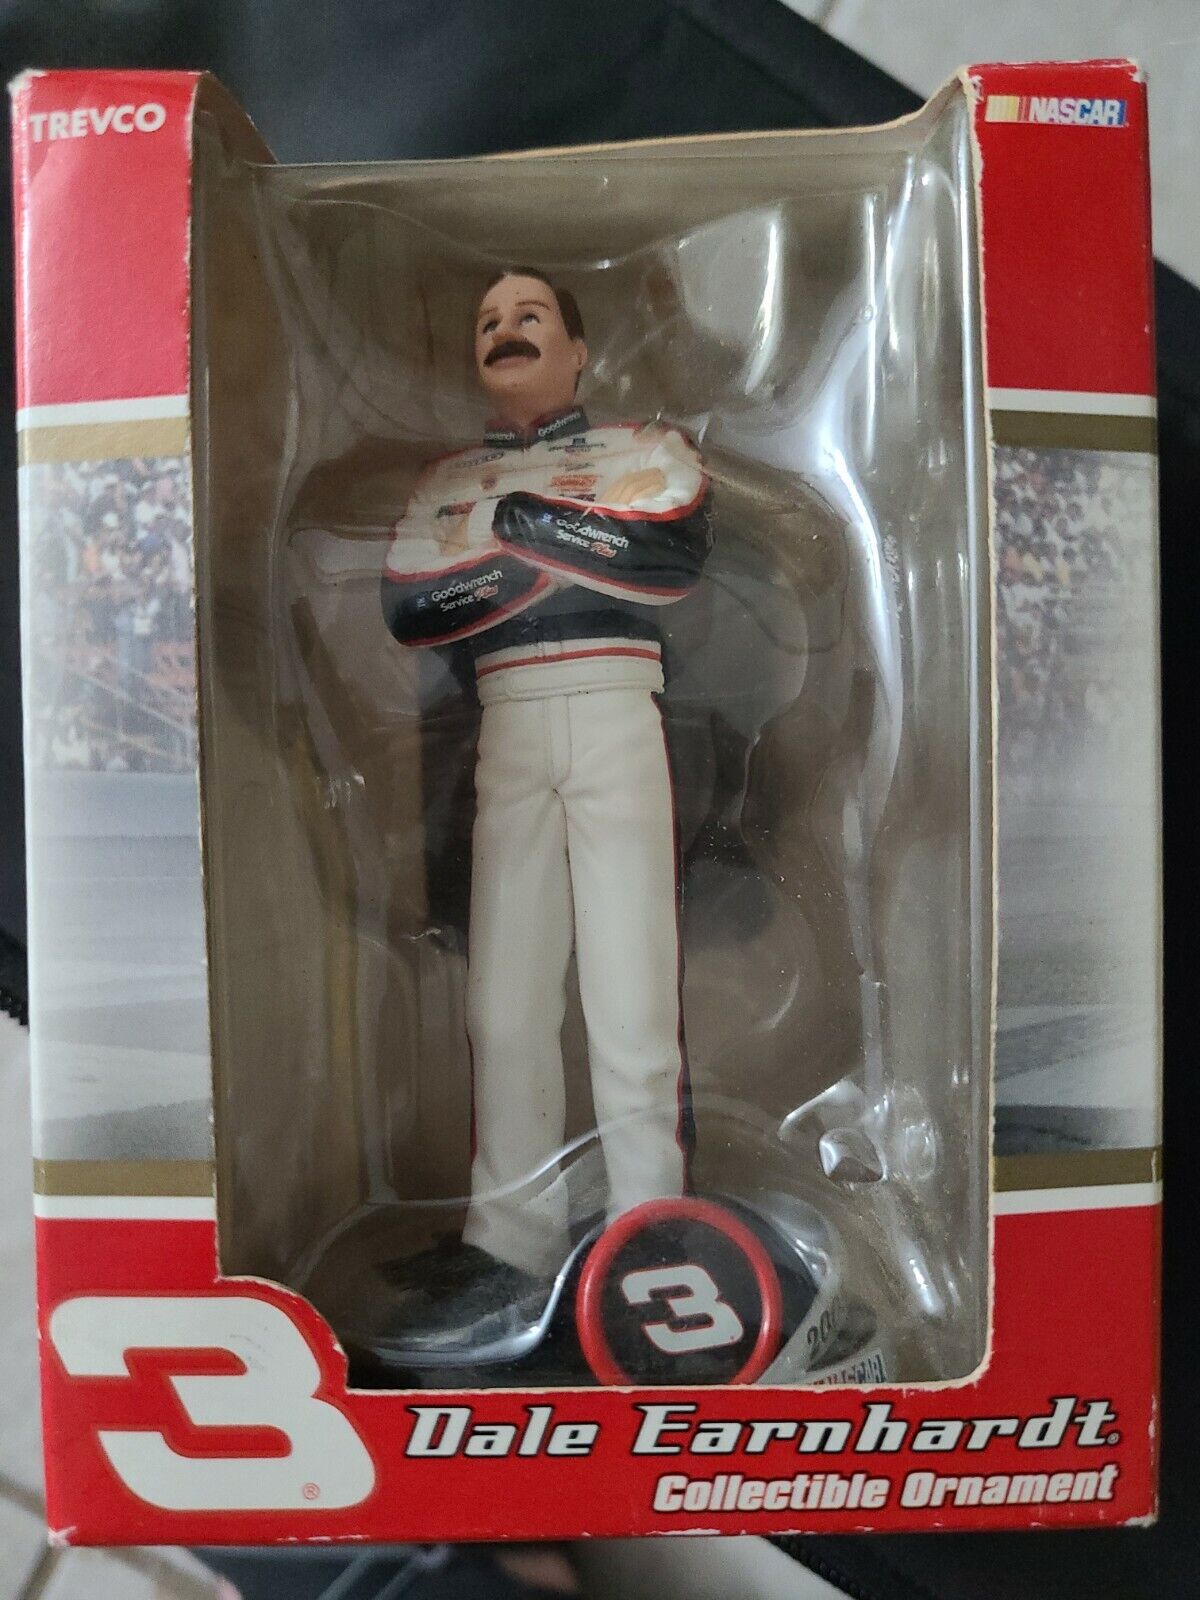 Indefinitely Nascar Collectible Christmas Ornament Dale Super sale period limited by 3 Earnhardt Trevco